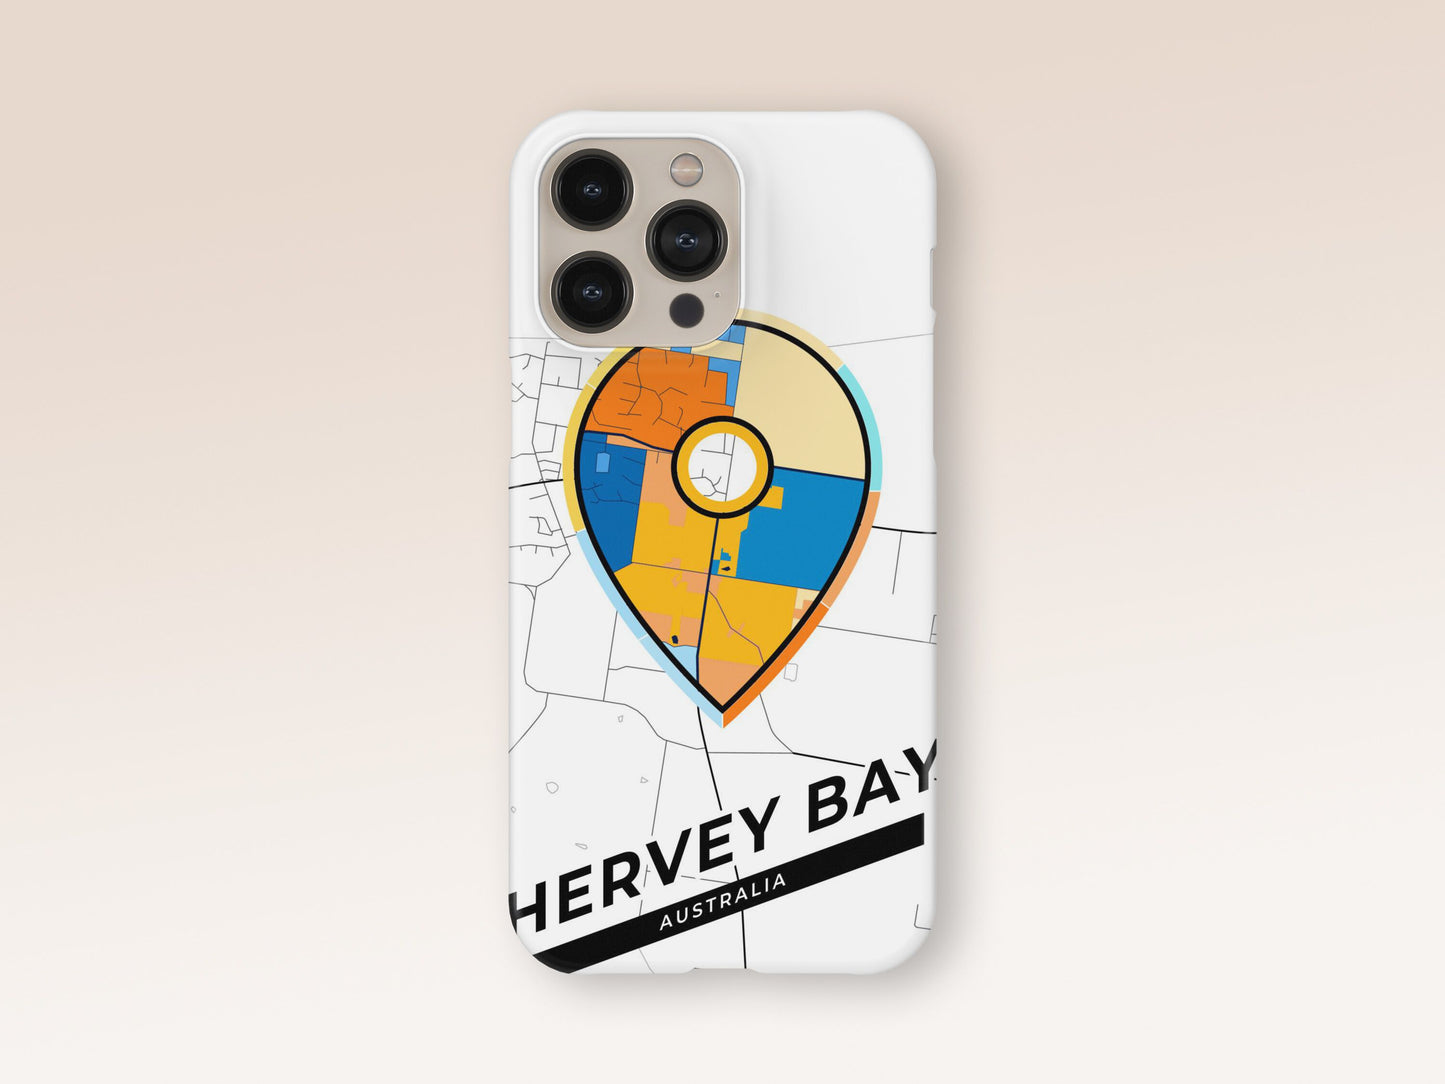 Hervey Bay Australia slim phone case with colorful icon. Birthday, wedding or housewarming gift. Couple match cases. 1